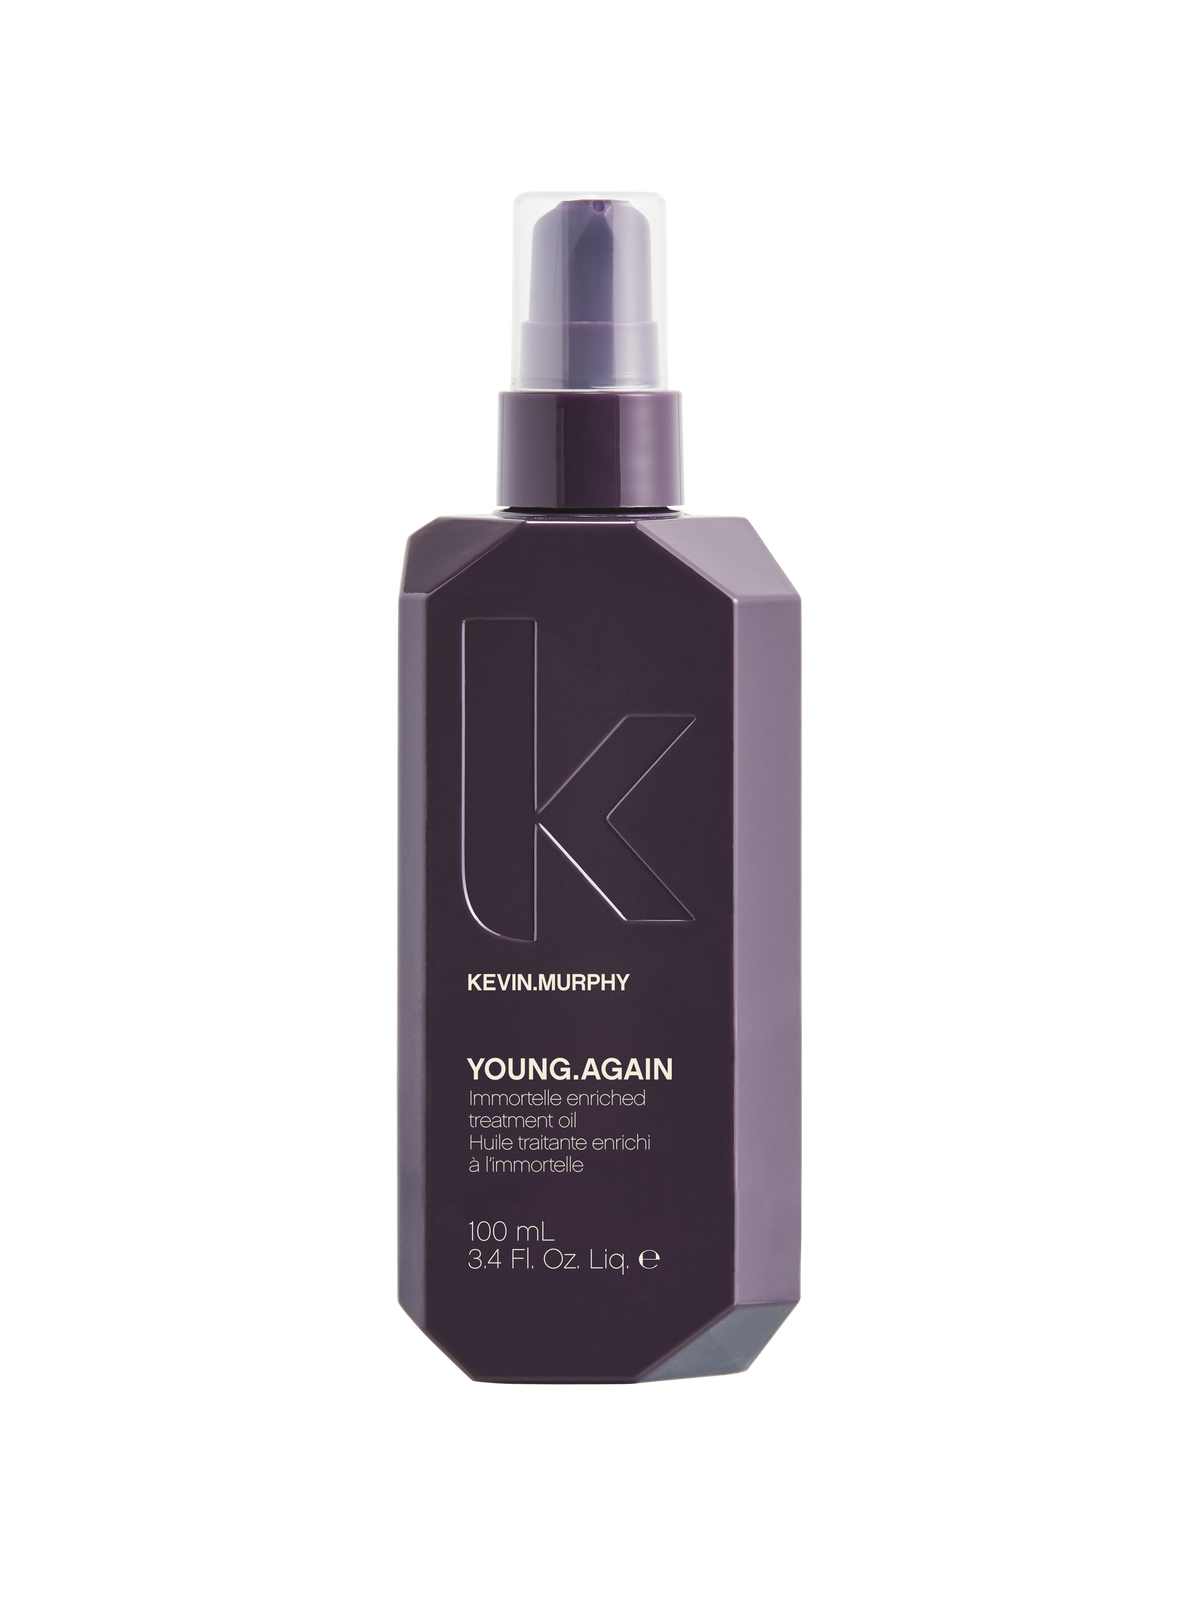 KEVIN.MURPHY YOUNG AGAIN 永生花輕盈免洗修護油 100ml